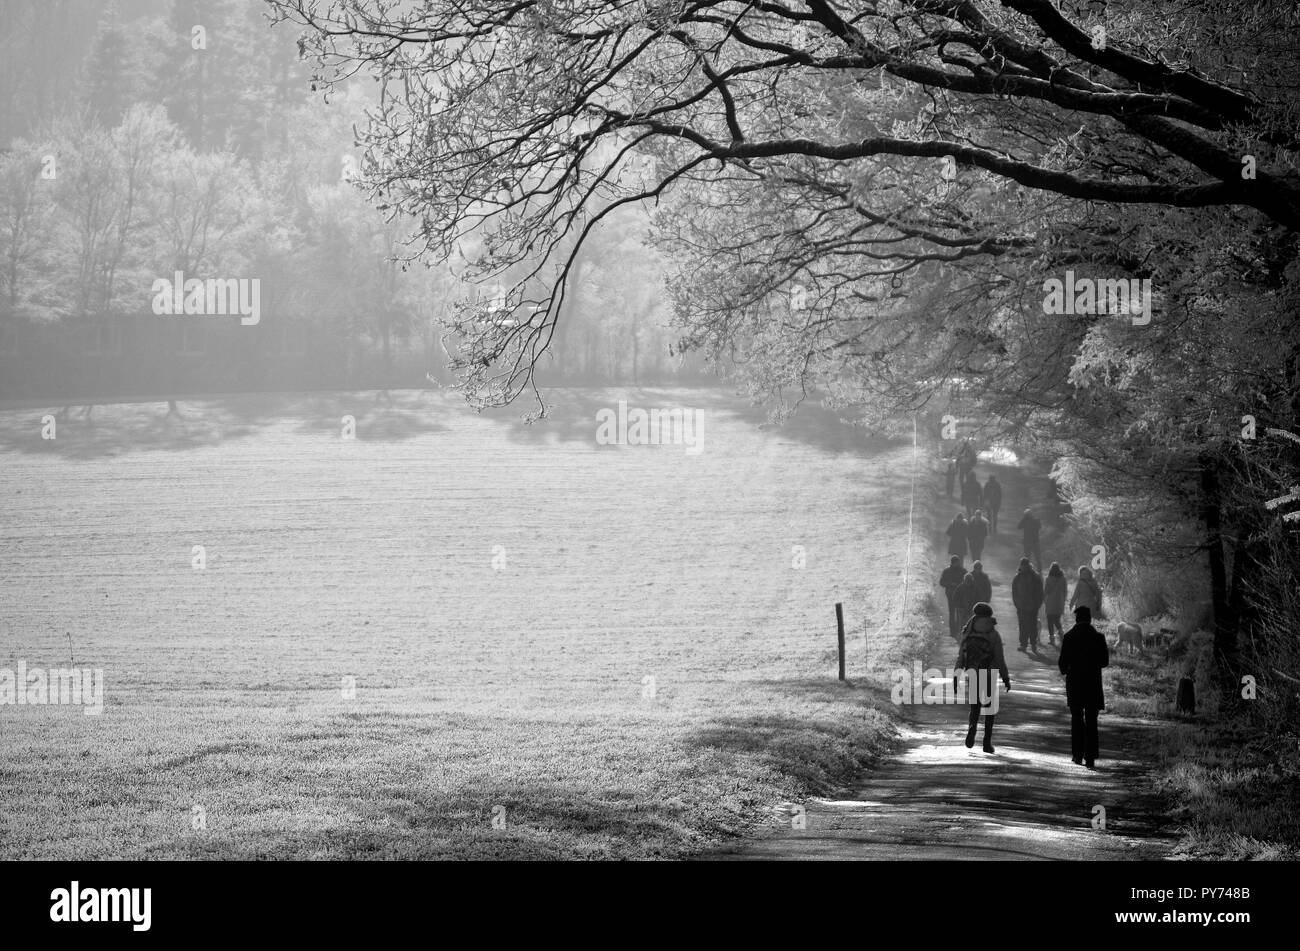 People walking in the cold winter on a road between a field and a forest. Strong morning lights and white ice contrasting the shadow under the trees.  Stock Photo